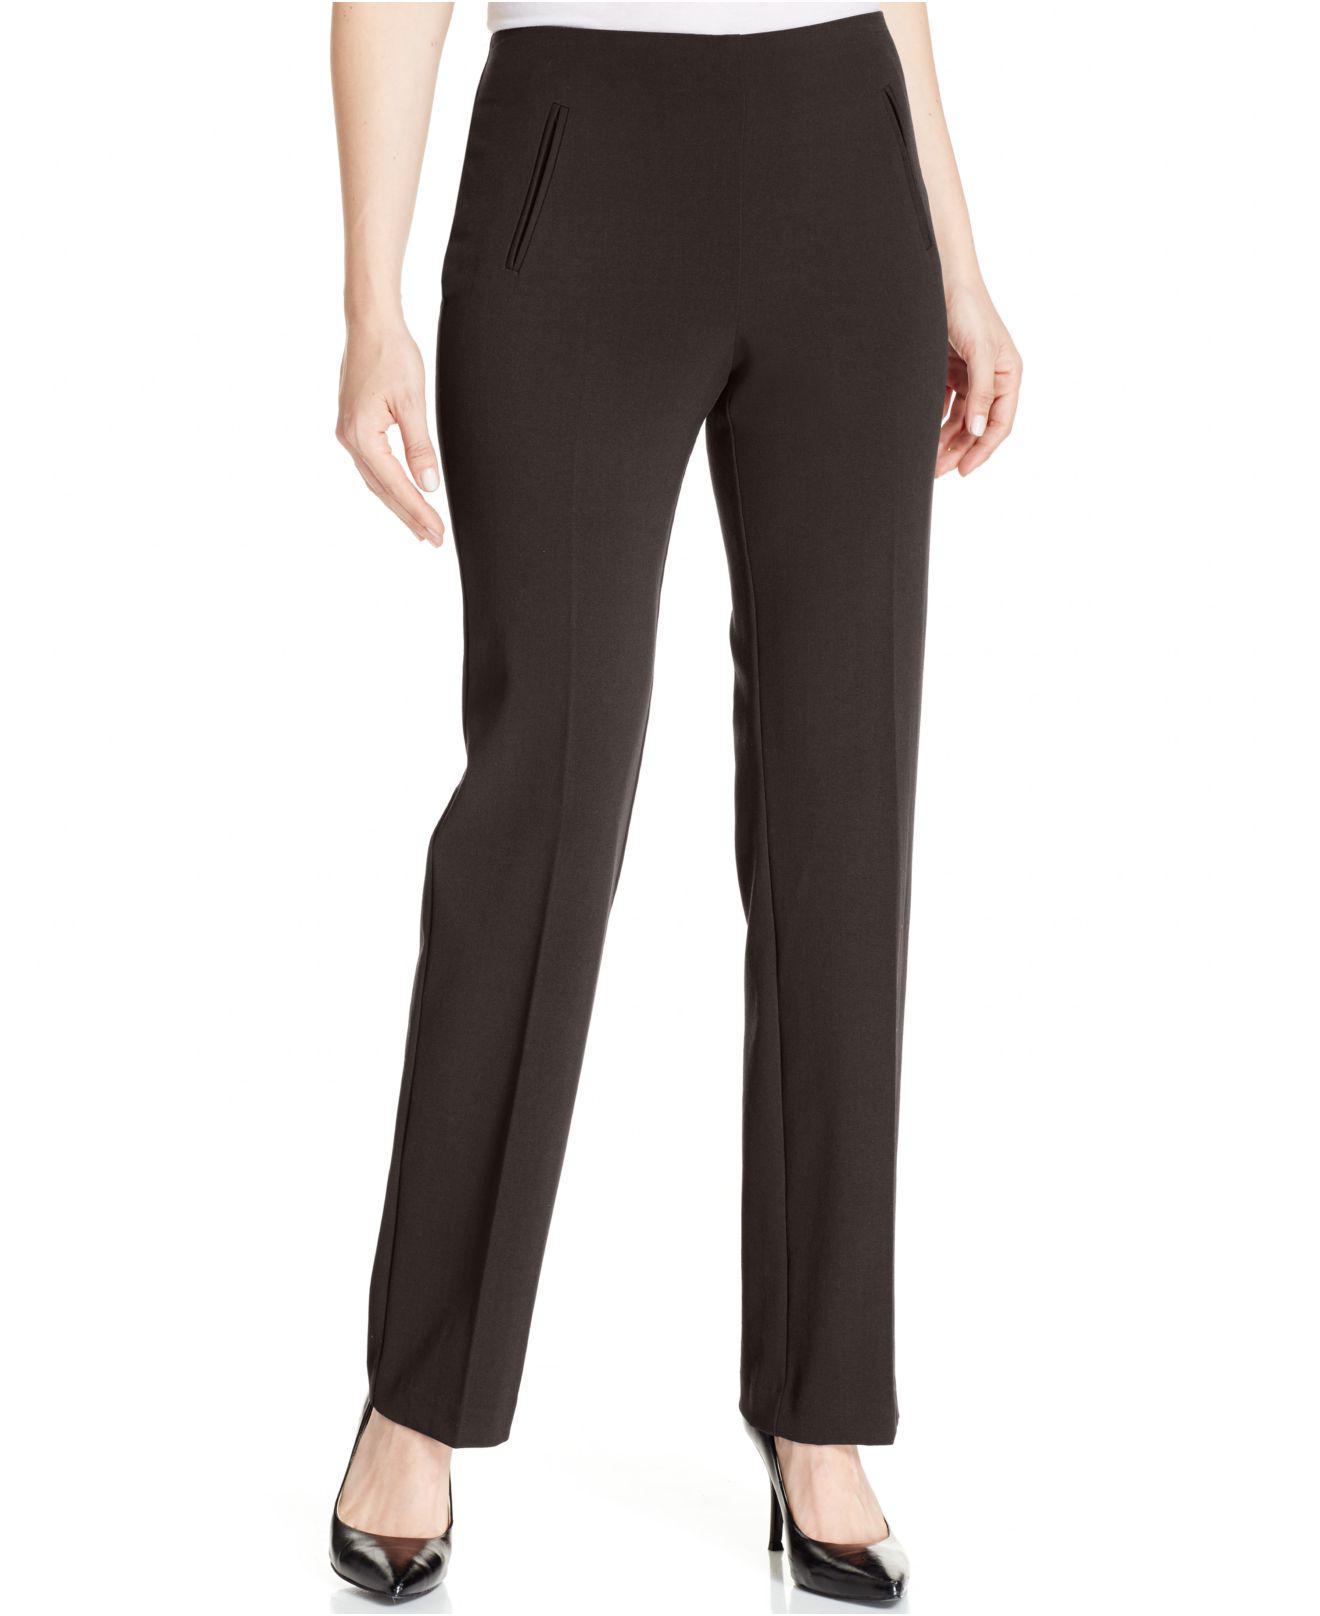 Style & Co. Tummy-control Pull-on Pants in Brown | Lyst